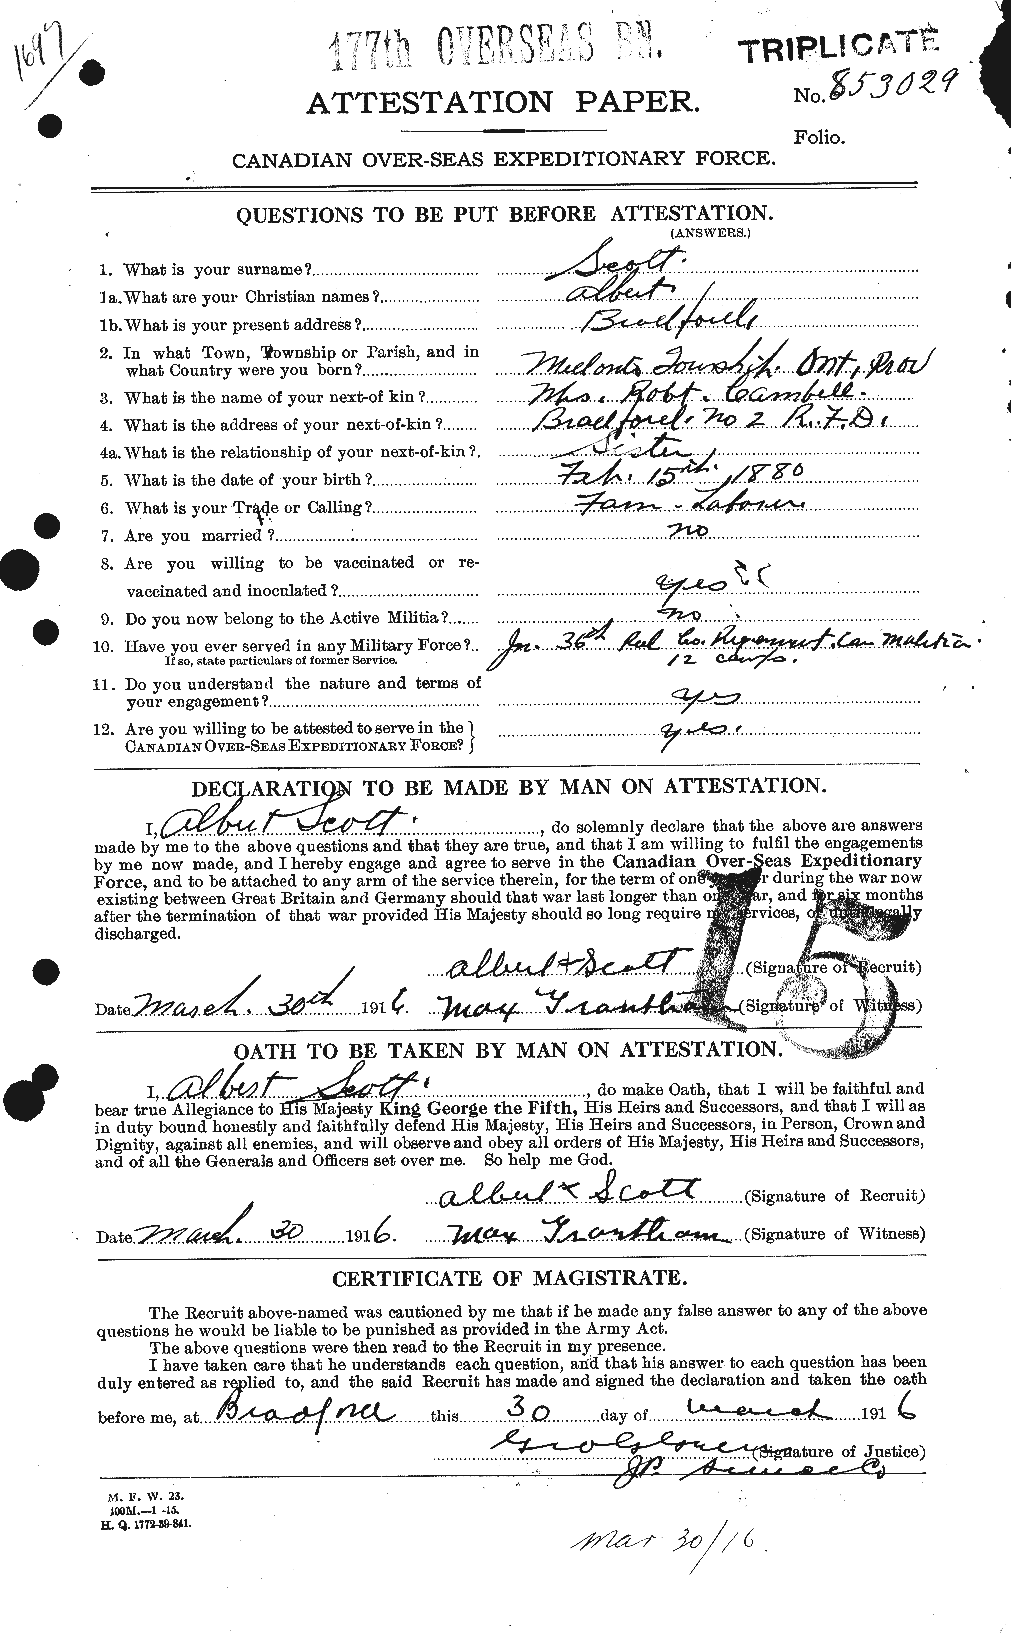 Personnel Records of the First World War - CEF 079280a